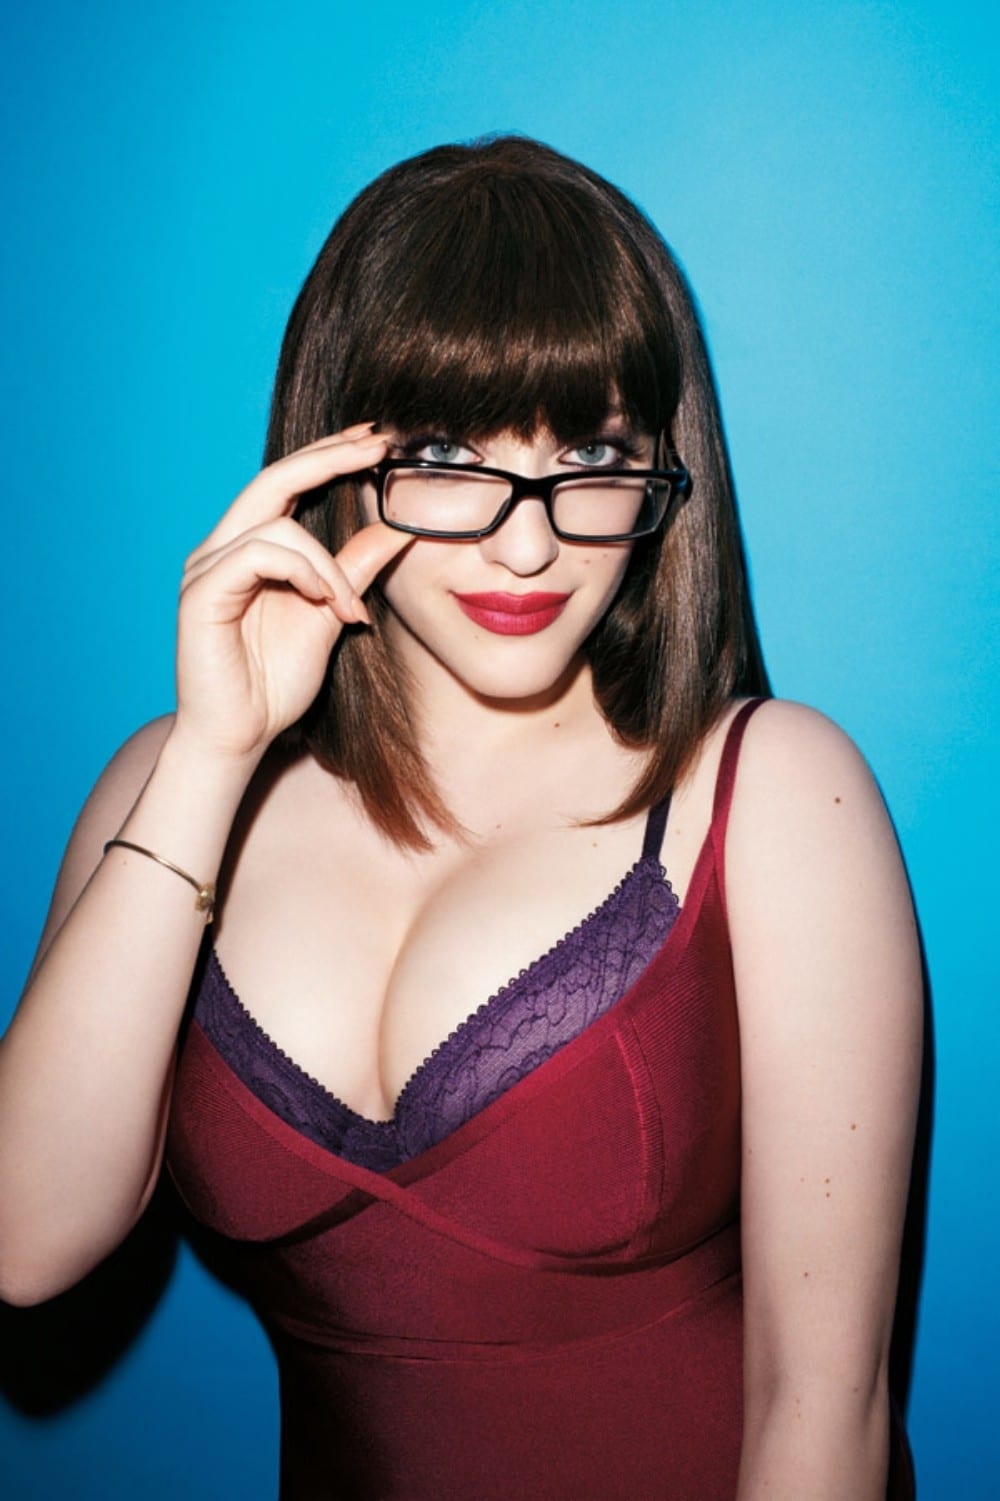 Kat Dennings hot pic of her with glasses on